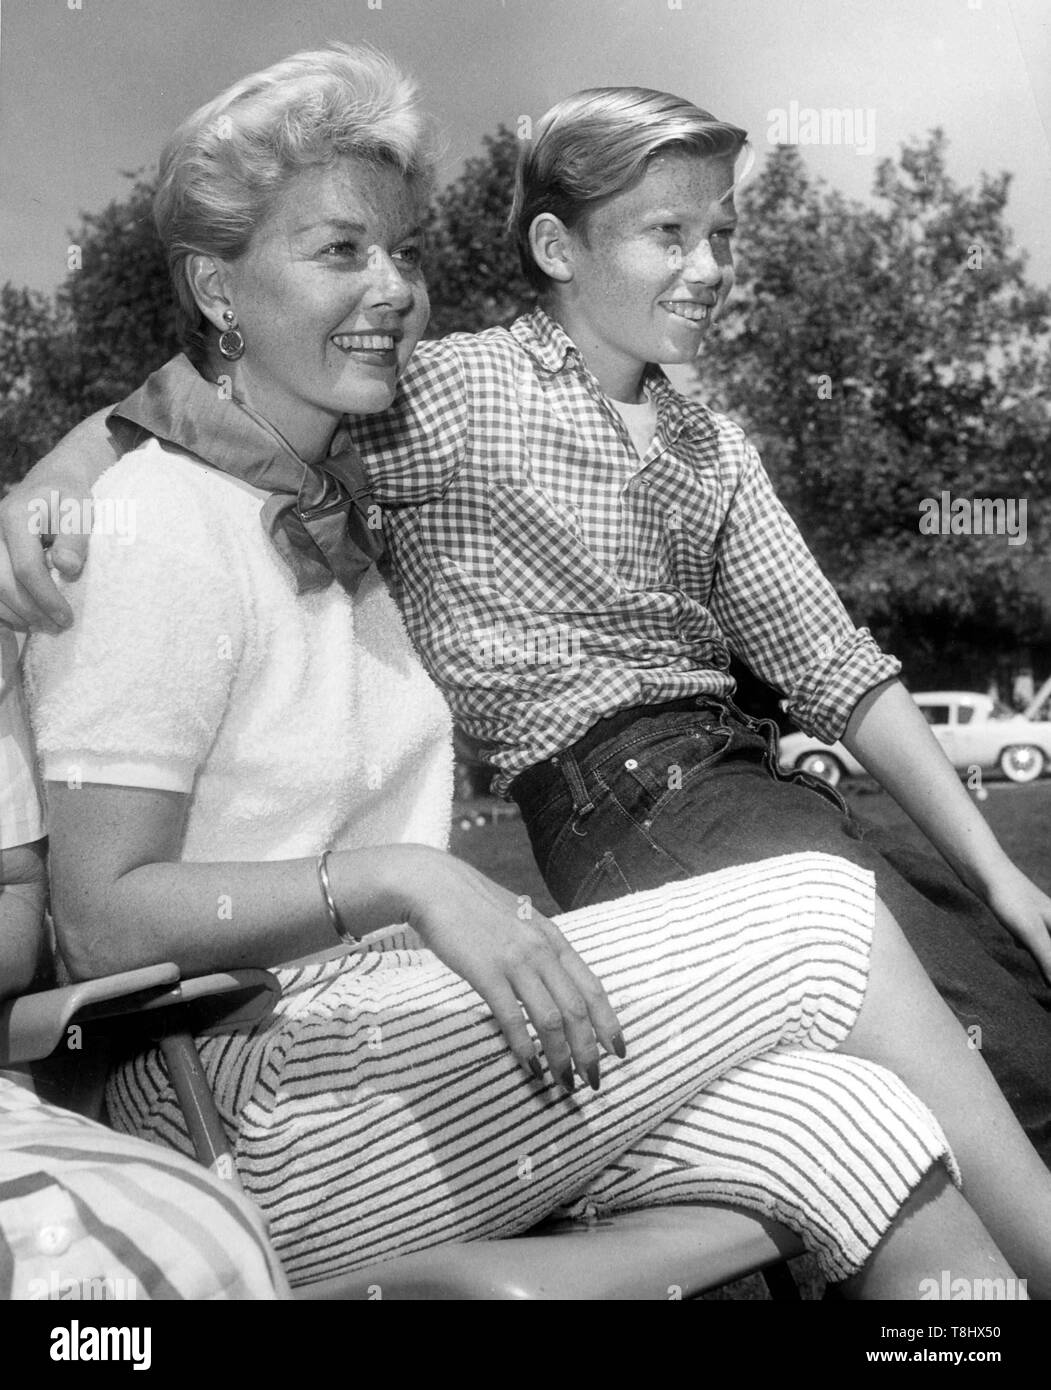 May 13, 2019: File Photo: DORIS DAY, the perennial girl-next-door whose career as a singer and actress spanned almost 50 years and made her one of the biggest Hollywood stars and most popular entertainers in the United States has died. She was 97. PICTURED: DORIS DAY and her son TERRY MELCHER circa early 1950's. Credit: Allan S. Adler/Globe Photos/ZUMA Wire/Alamy Live News Stock Photo